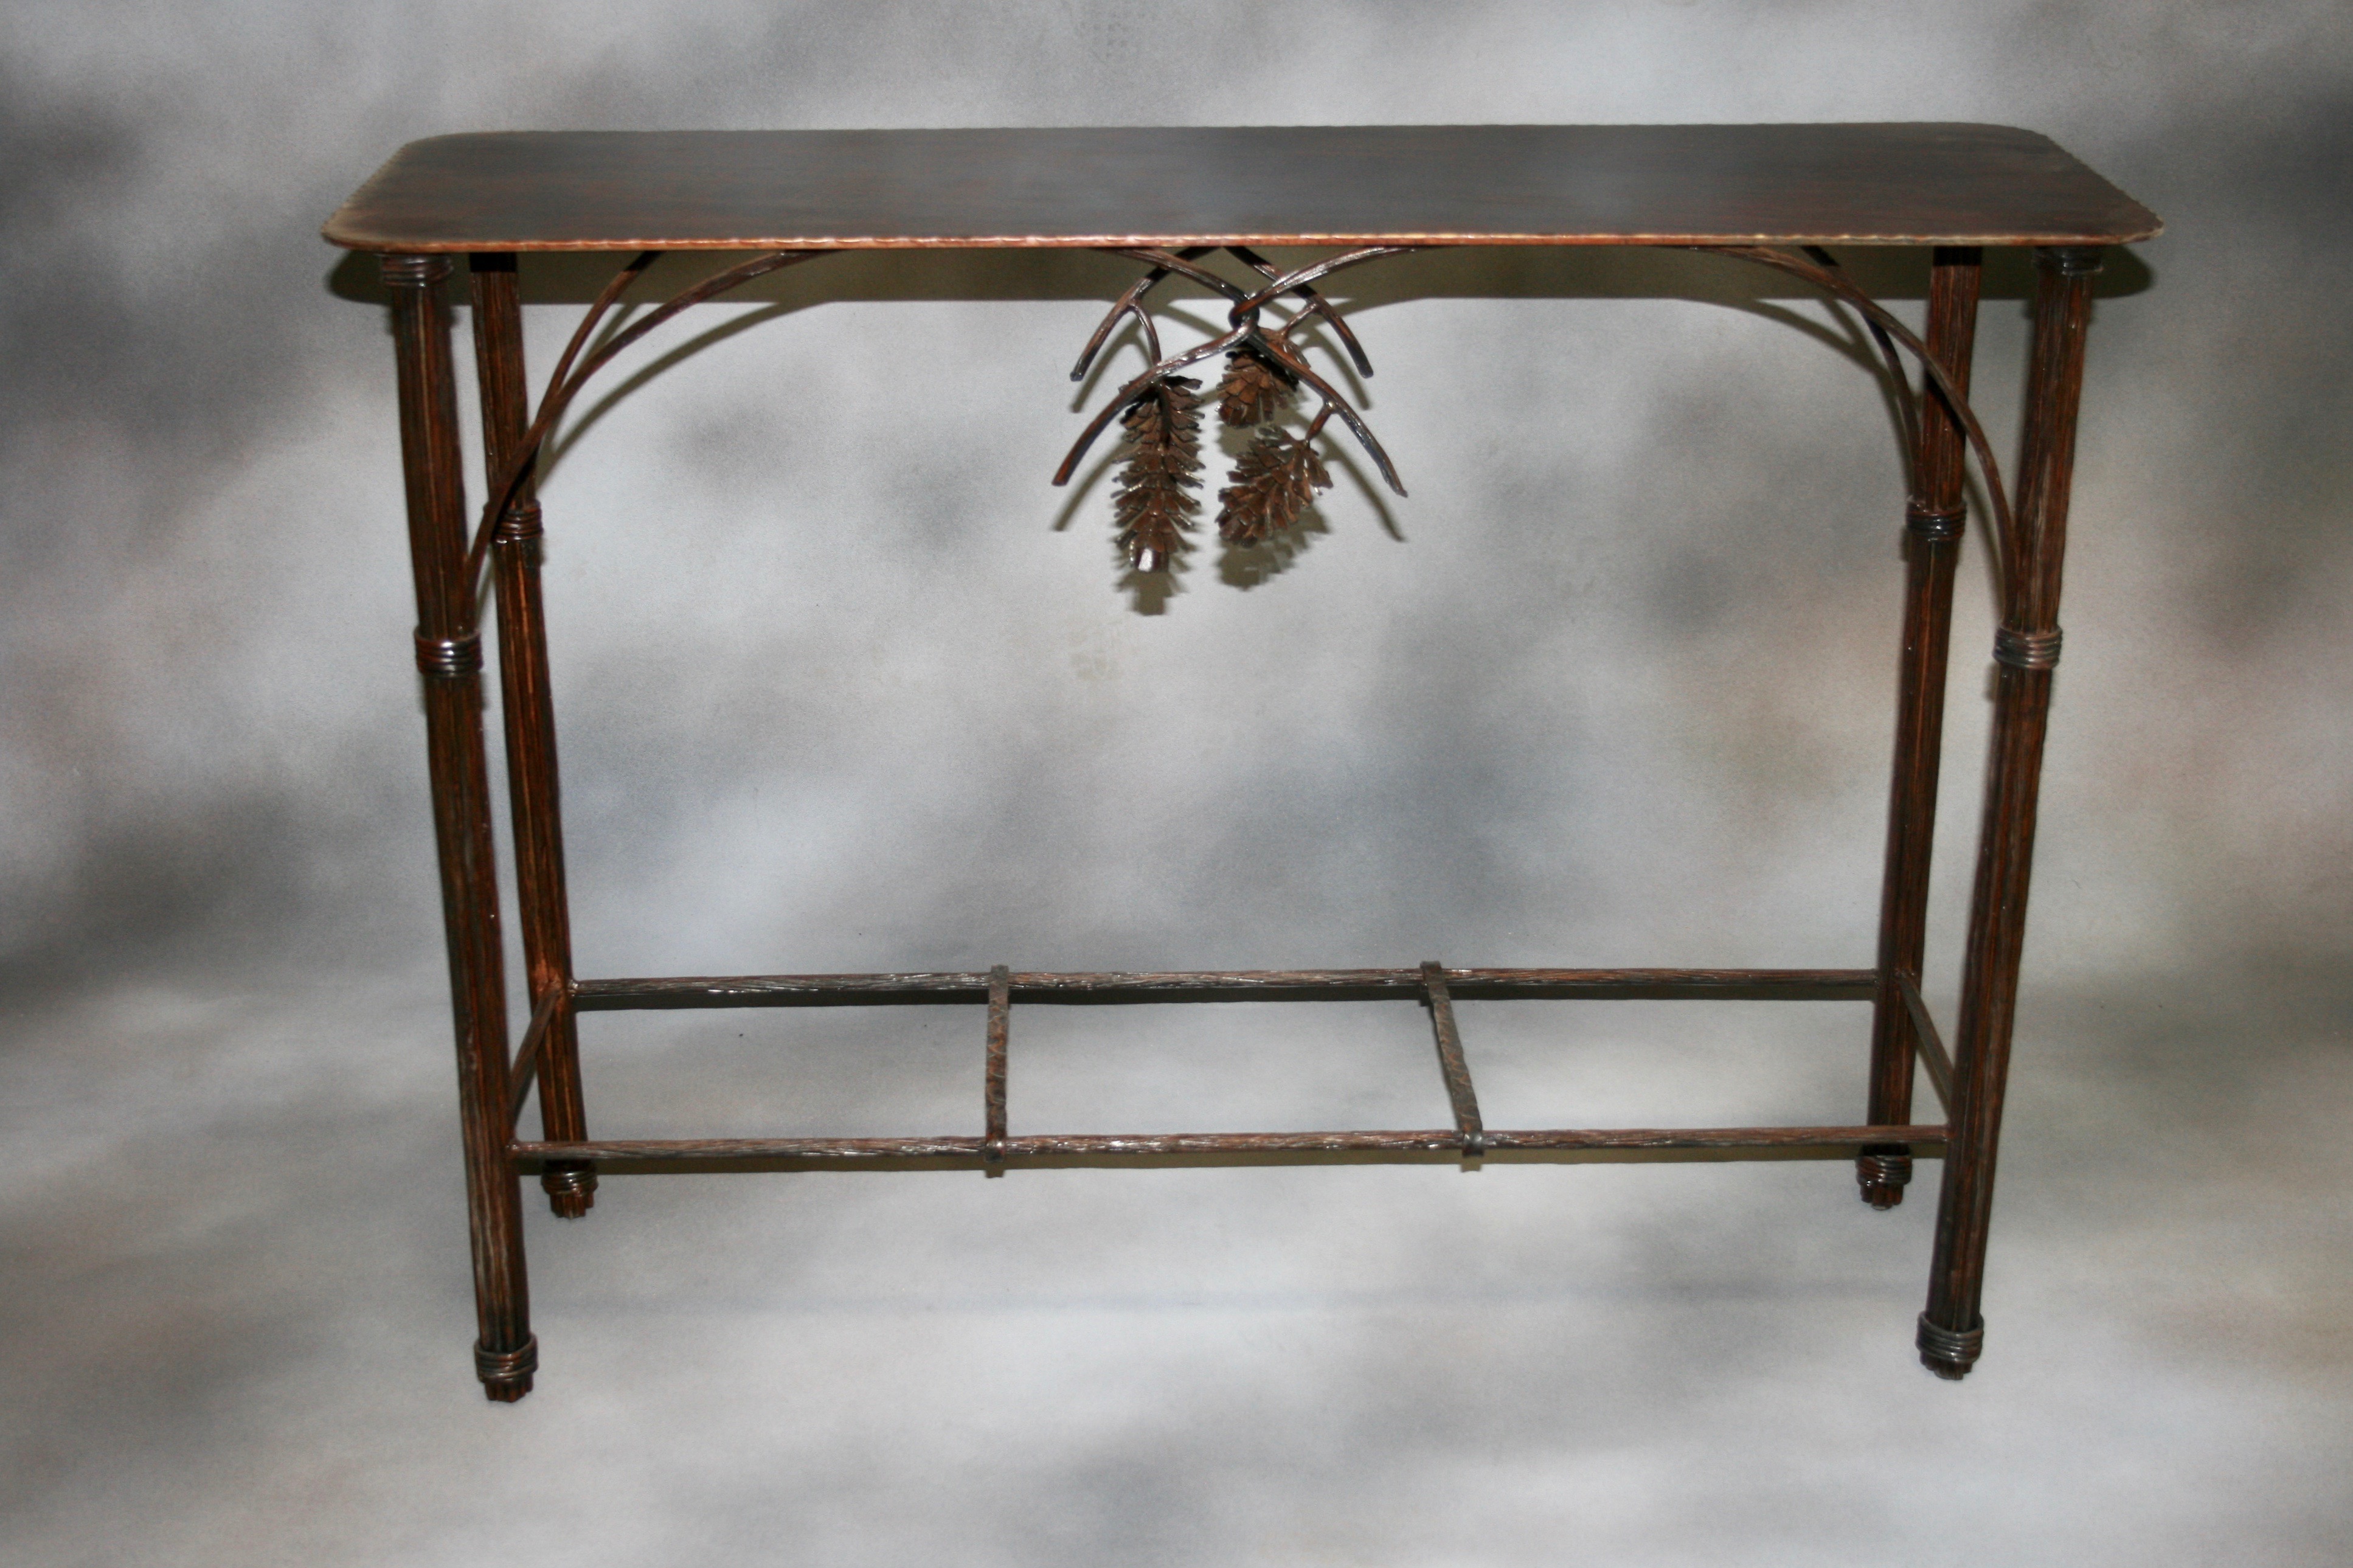 tables frontier iron works pine cone accent table light end refrigerator combo small marble top side glass lamp shades legs wine rack oak dining room build coffee wooden design